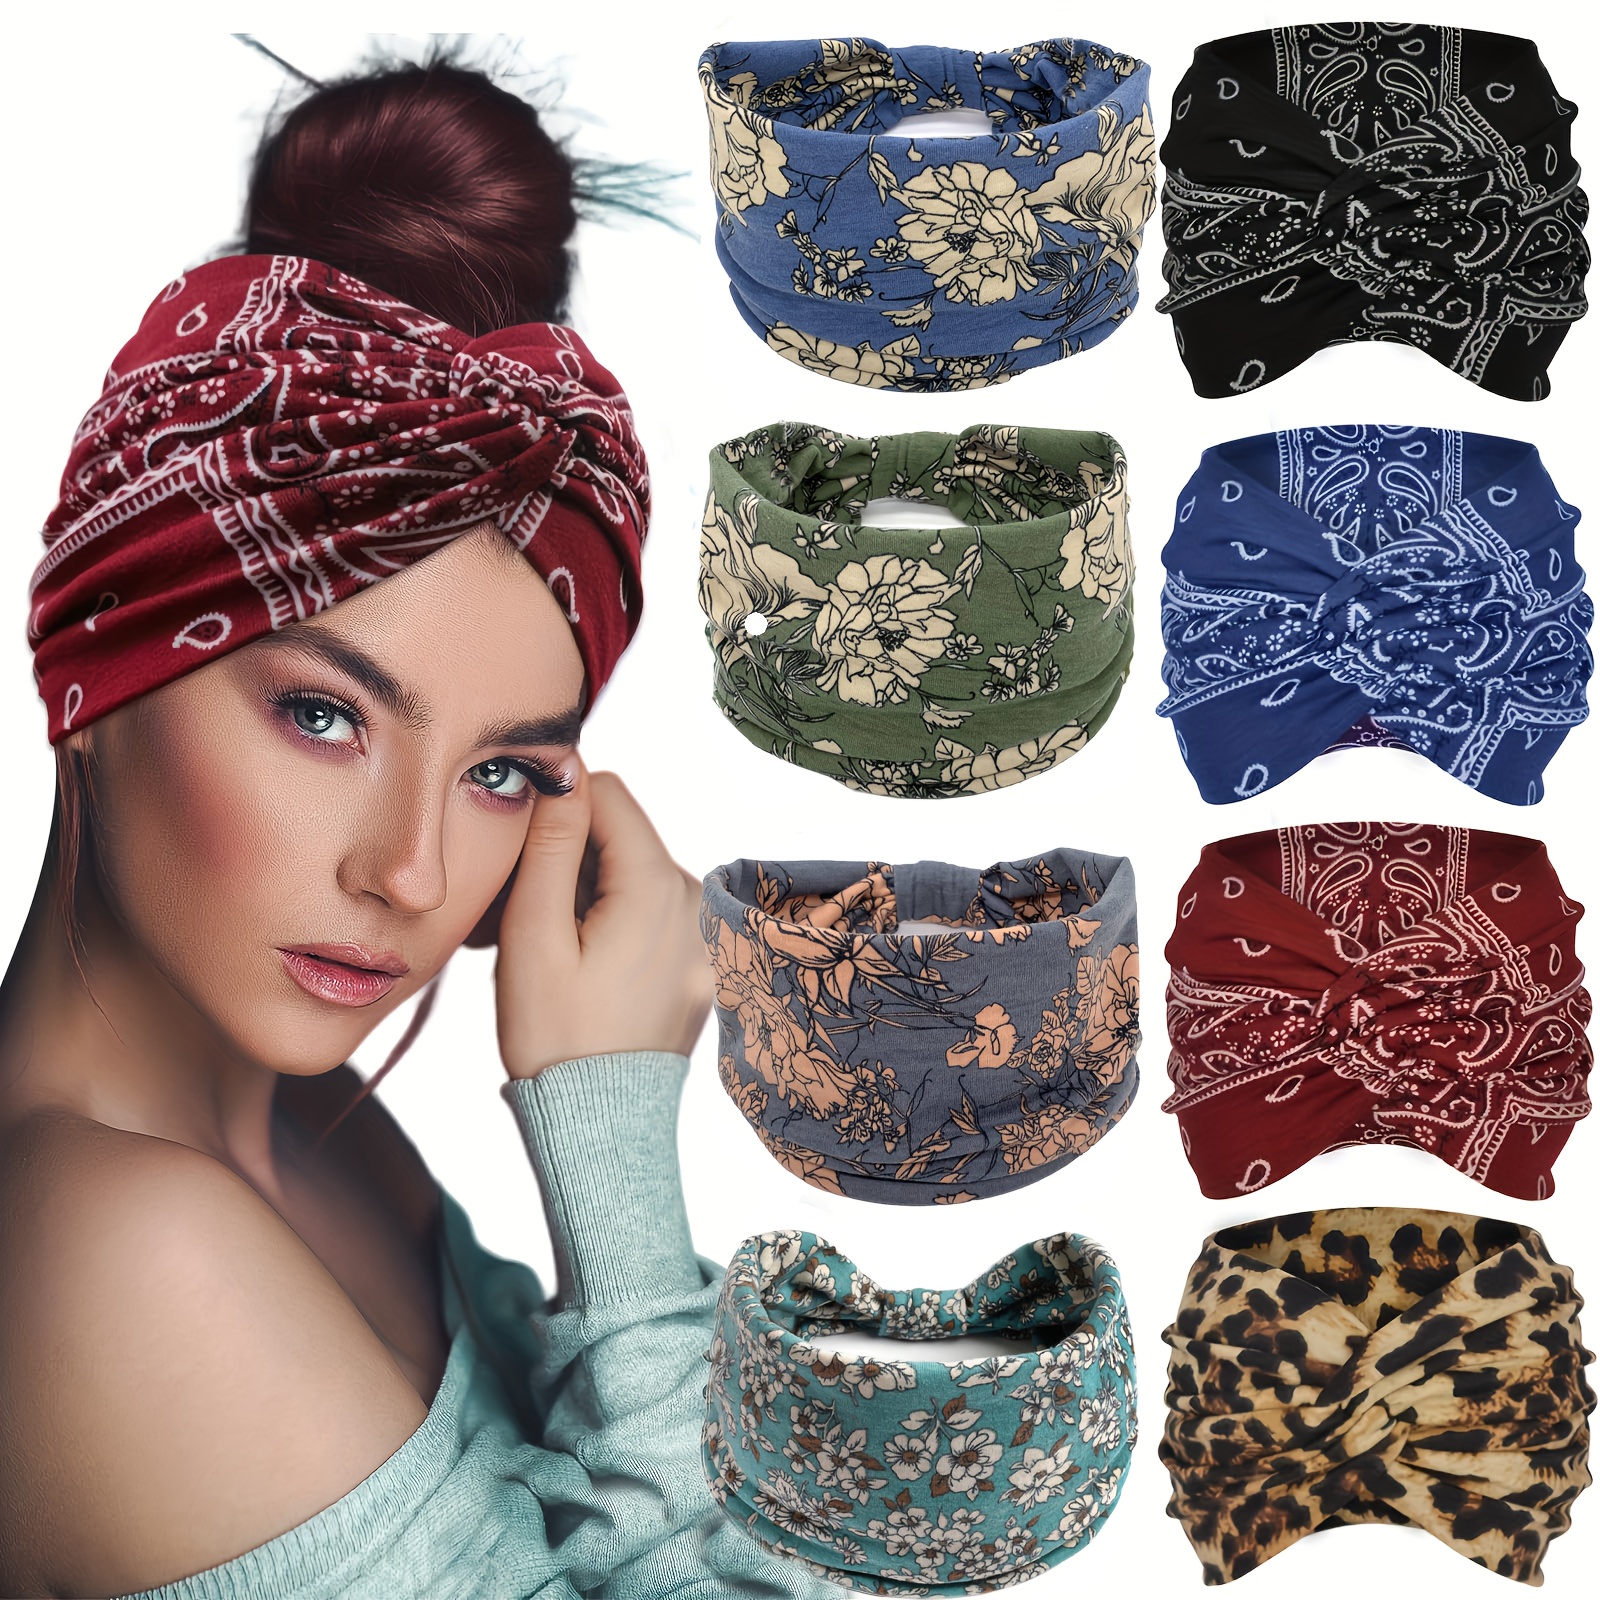 

8-pack Women's Fashion Headband Set, Bohemian Vintage Style Hair Bands, Athletic Yoga Sweat-wicking Turban Headwraps, Hair Accessories, Assorted Patterns